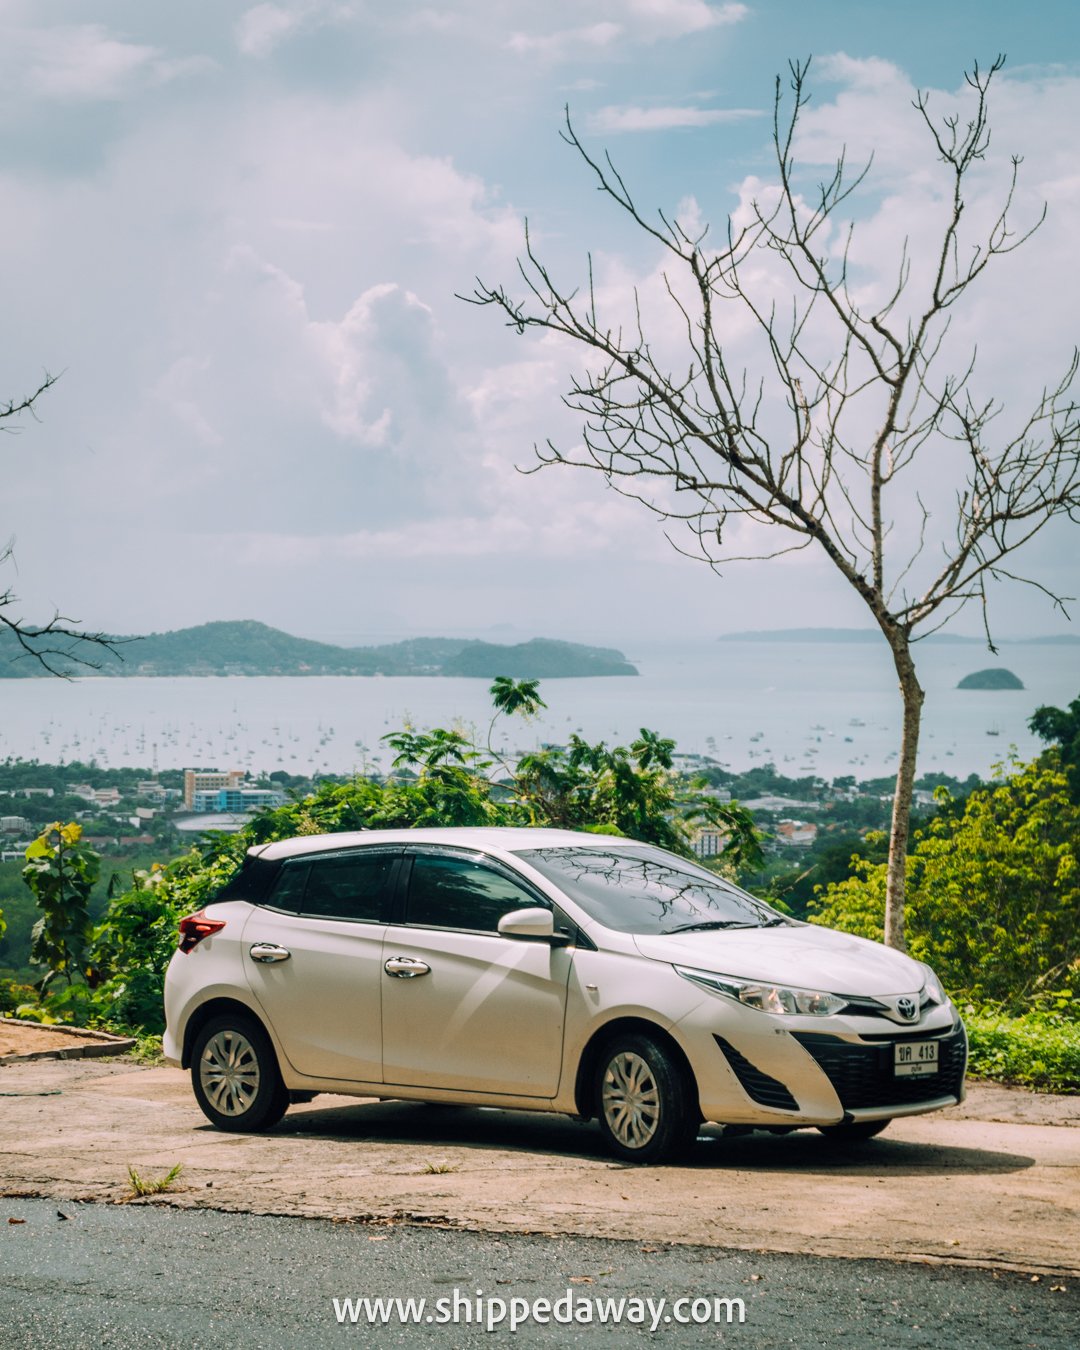 Renting a car in Phuket, Thailand